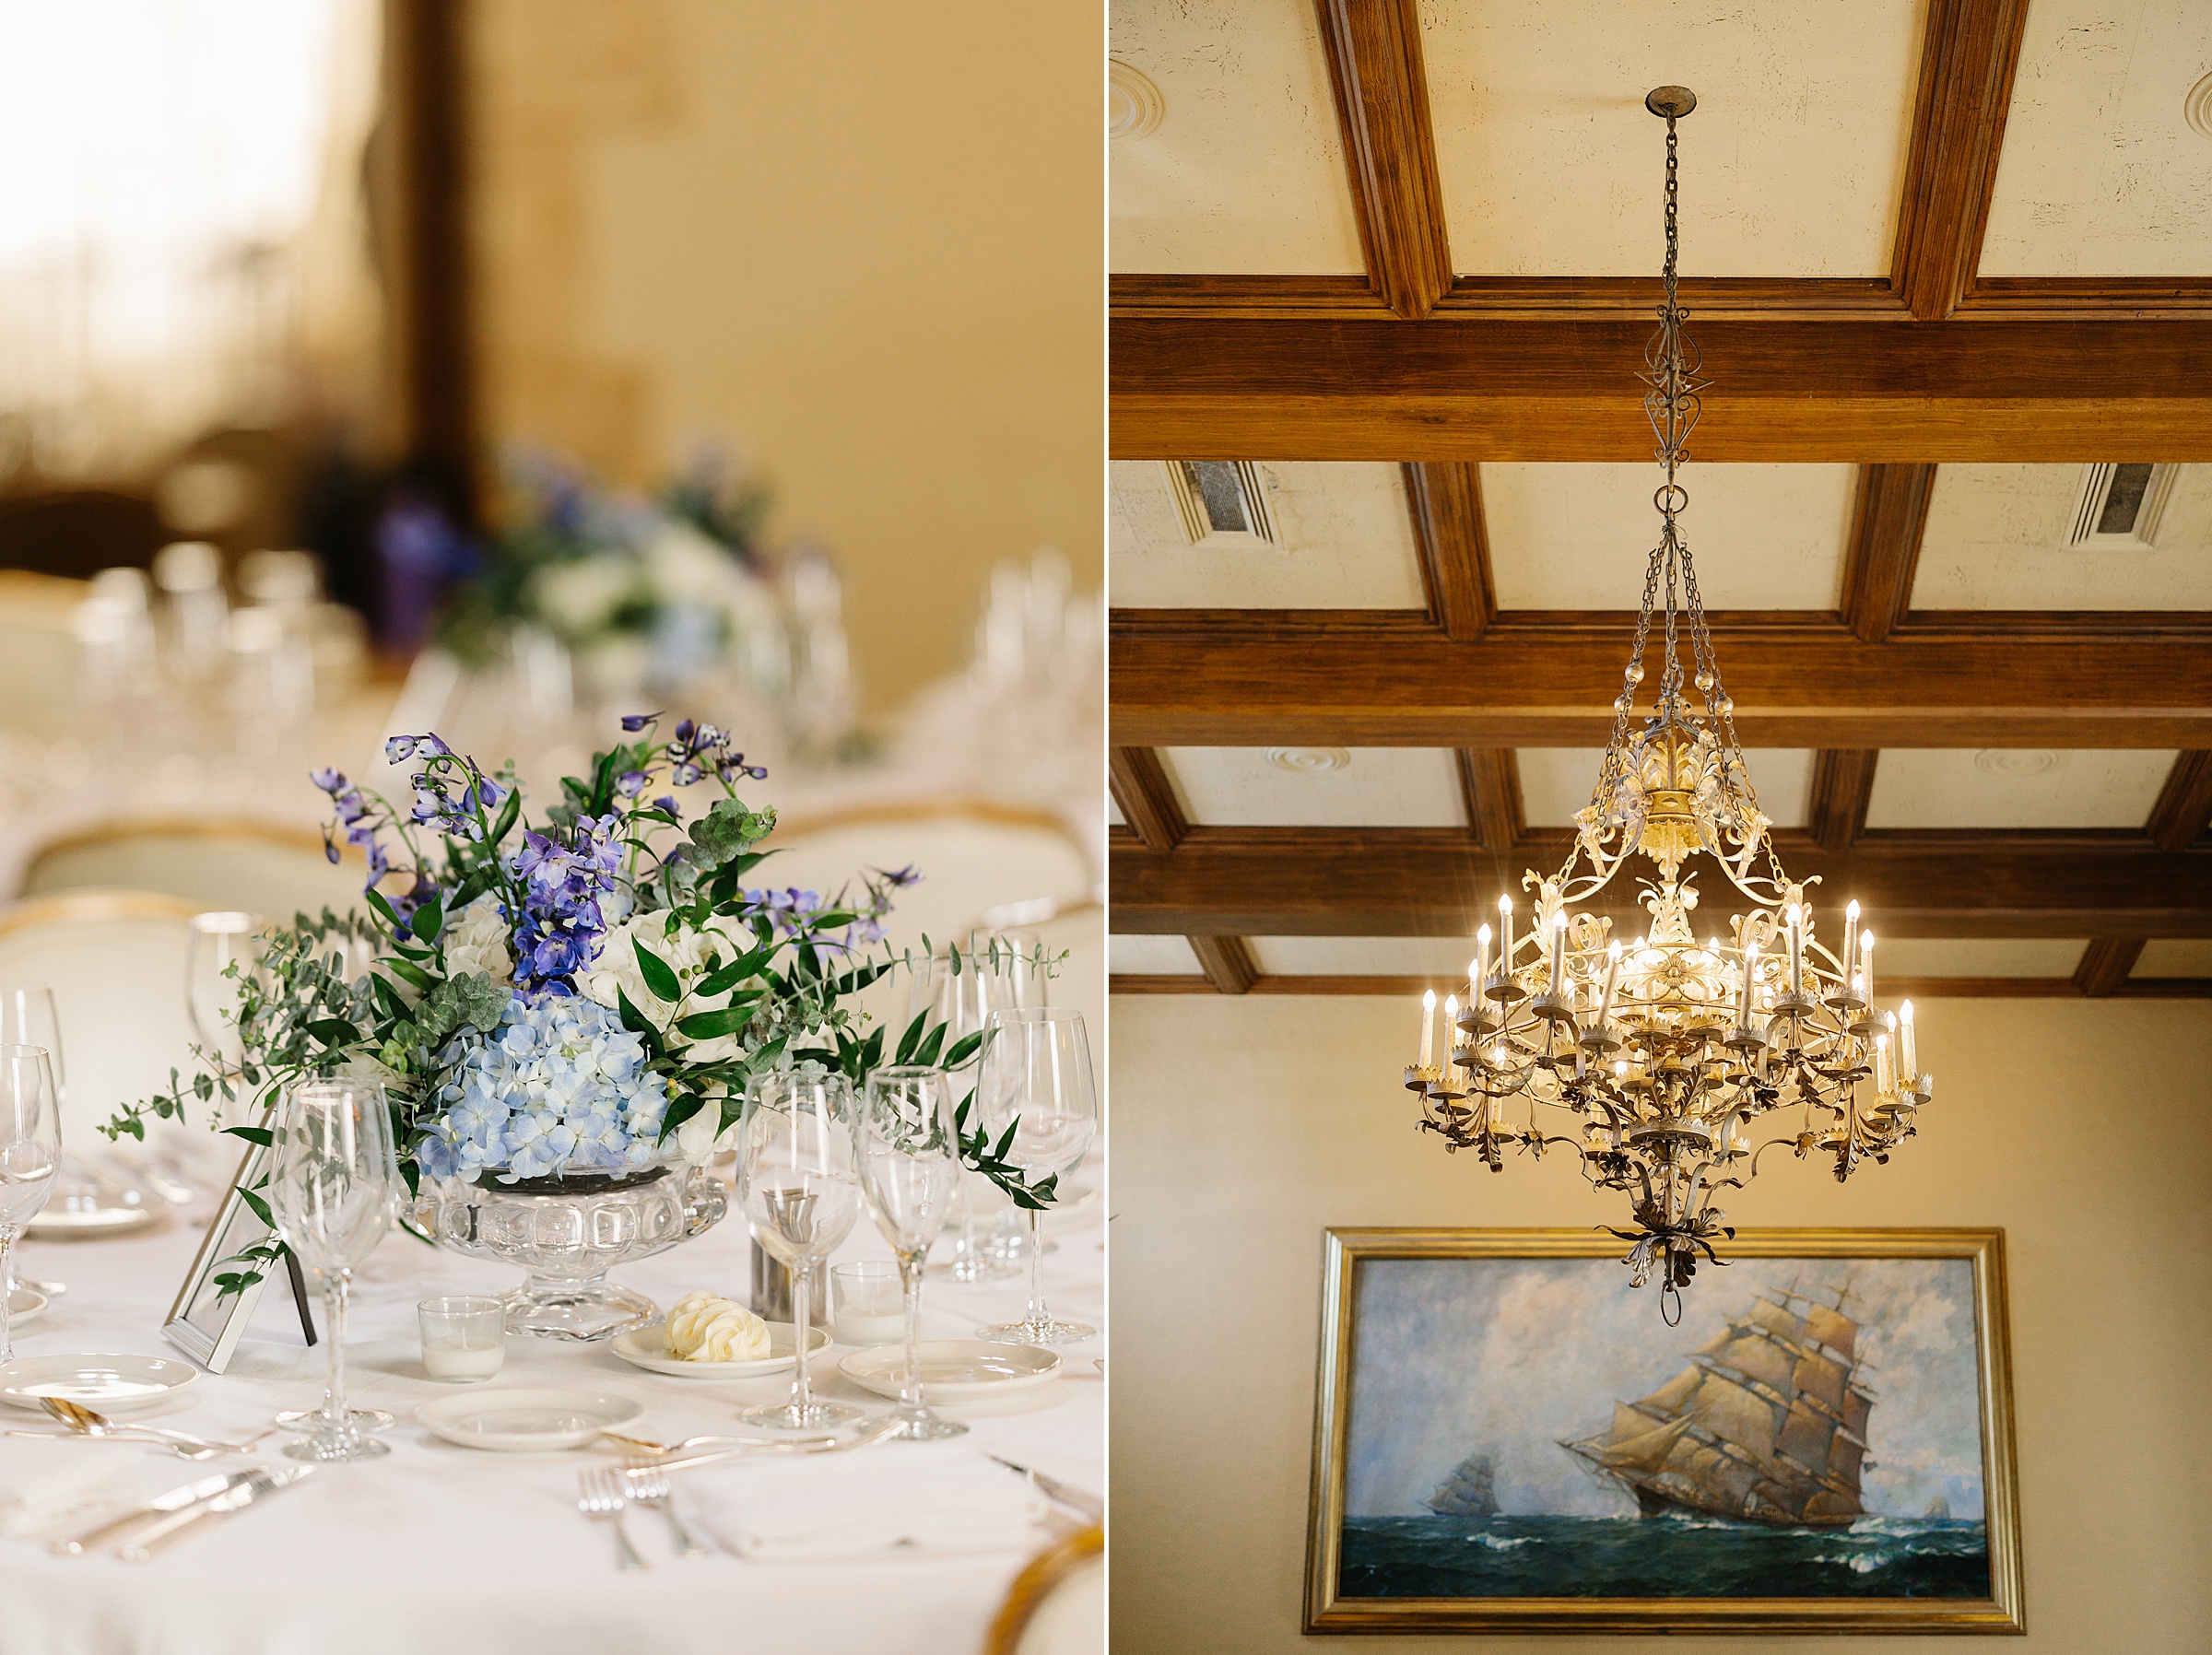 Detailed table setting shot; picturesque photo of a chandelier hanging above a painting at the Grosse Pointe Yacht Club by Detroit Wedding Photographer Michele Maloney